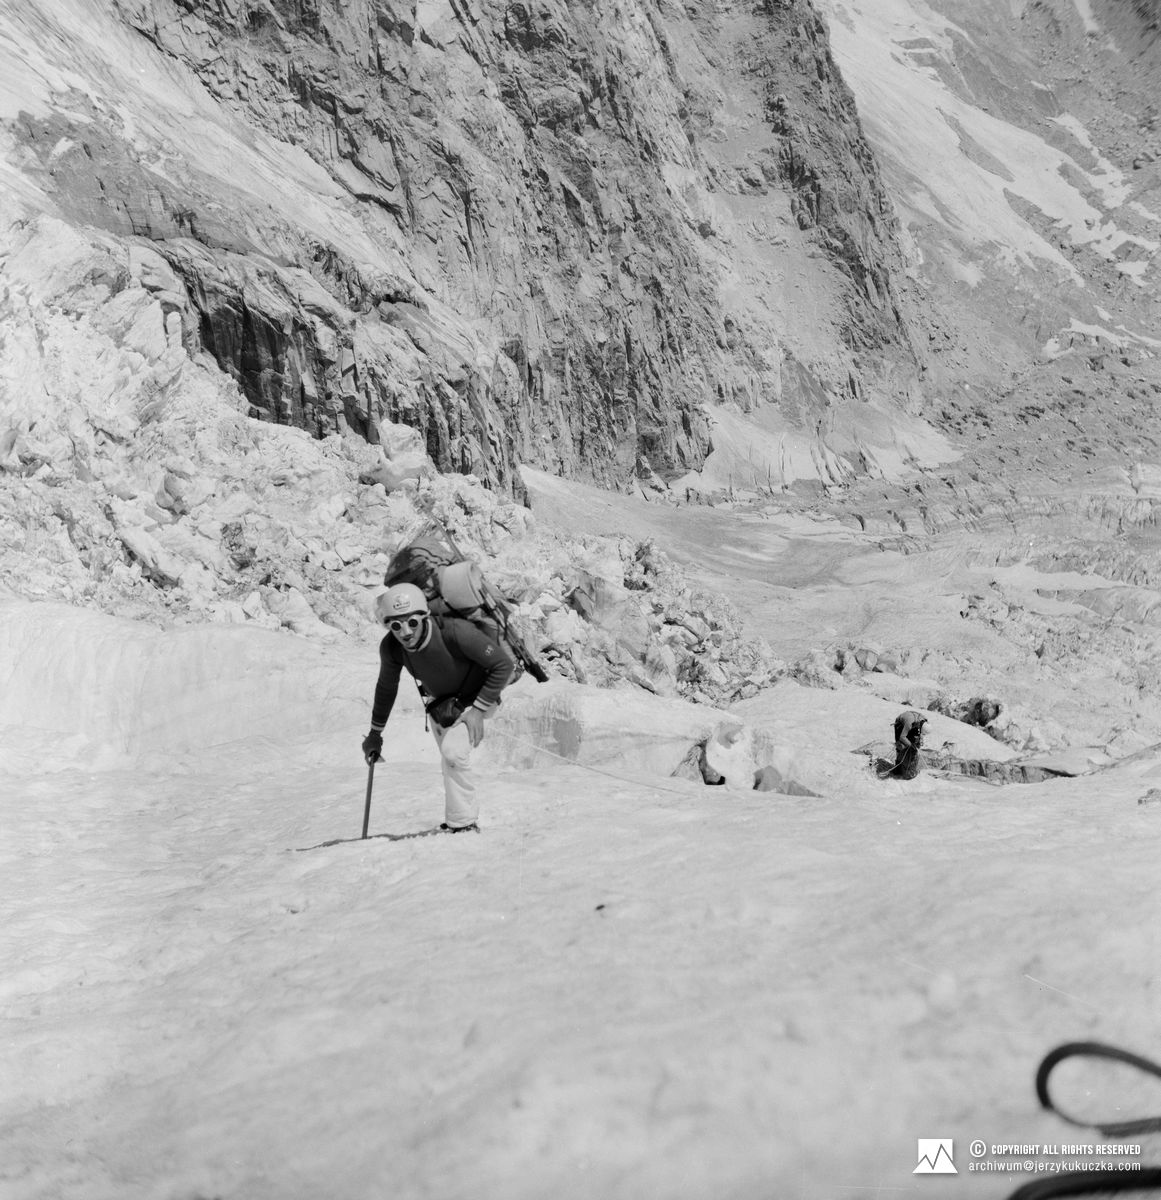 Participants of the expedition while climbing. From the left: Miro Štebe and Paweł Pallus.